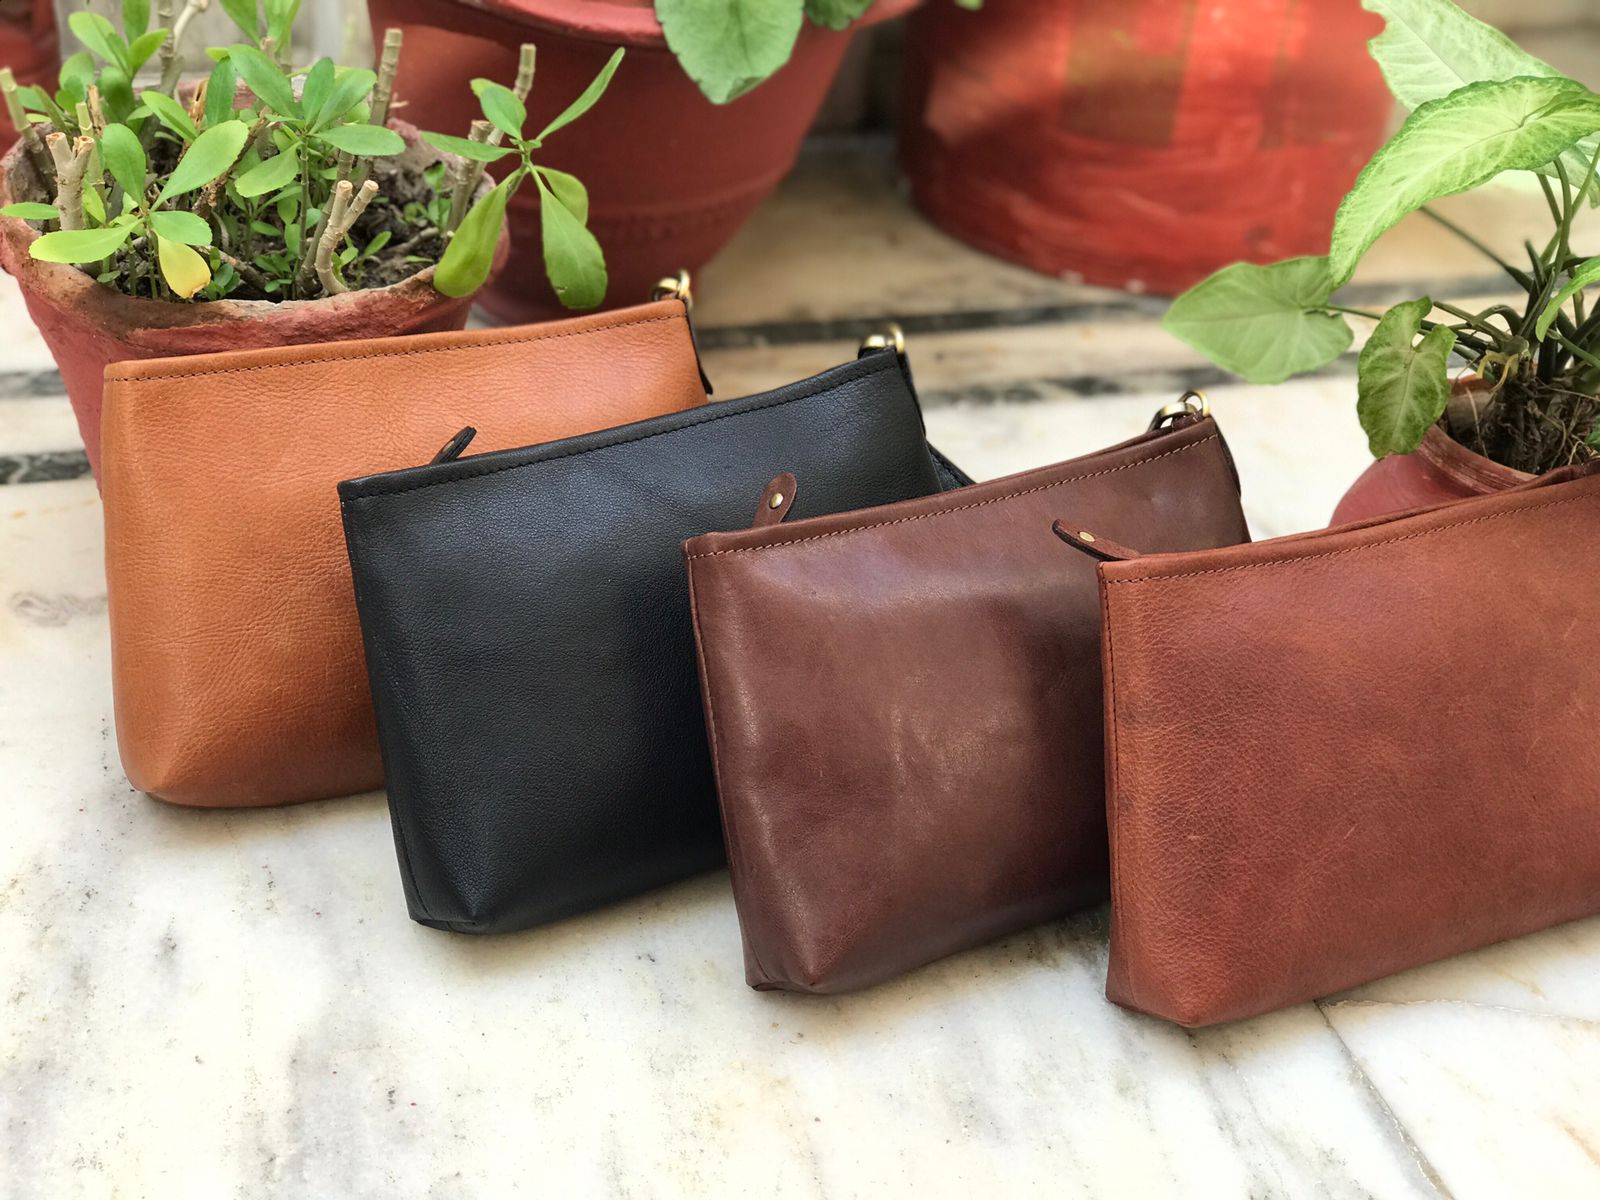 Leather Purses for sale in Allahabad, India | Facebook Marketplace |  Facebook